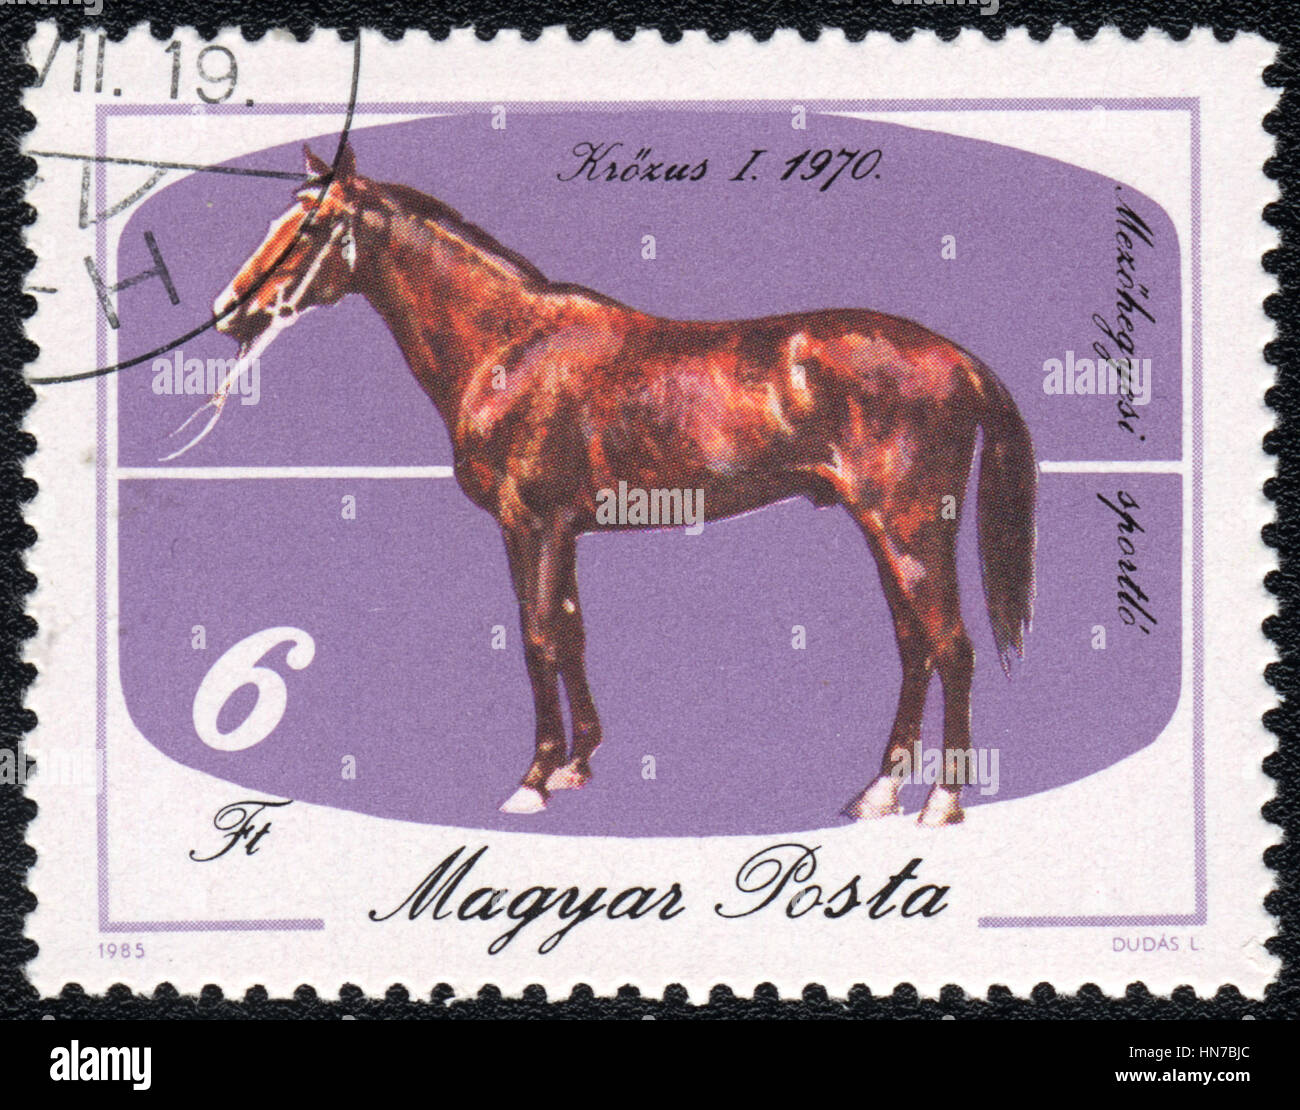 A postage stamp printed in Hungary  shows  a Brown Krozus (Equus caballus) standing on a purple background. Krozus I 1970, horses series, circa 1985 Stock Photo